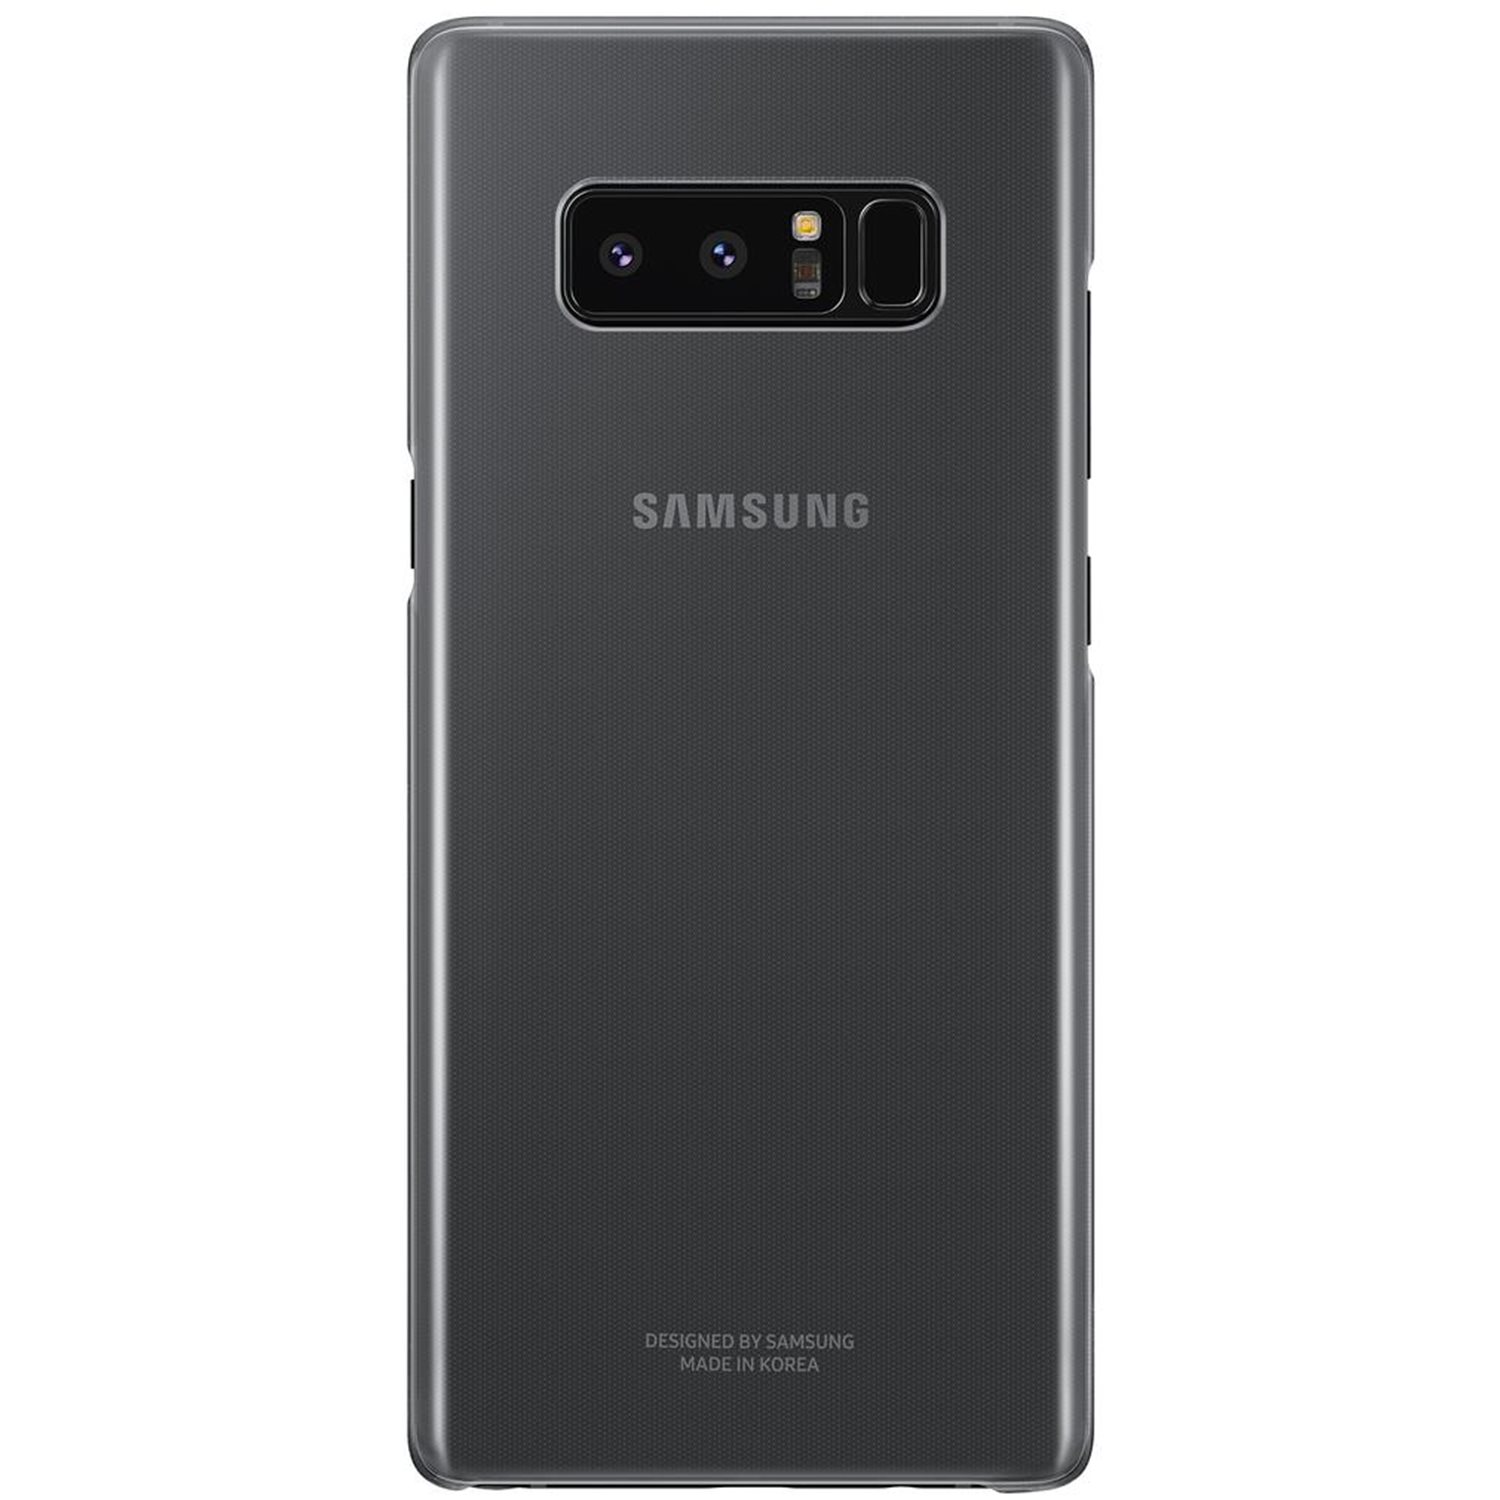 Official Samsung Galaxy Note 8 Clear Cover Case - Black